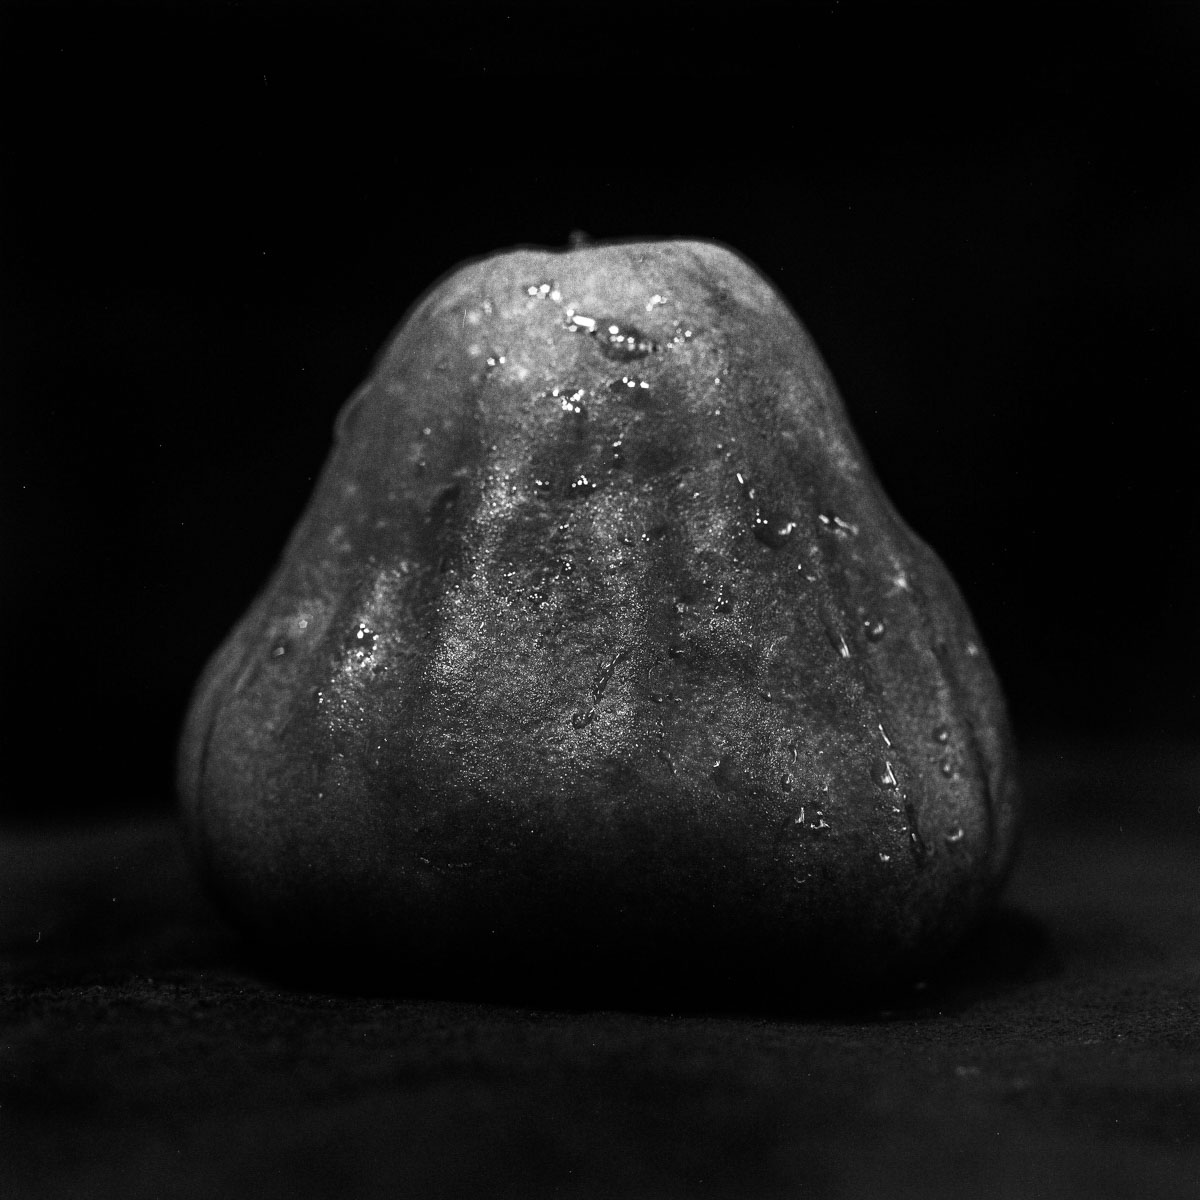 Wax apple light study #01 - Ilford Pan F Plus shot at EI 50. Black and white negative film in 120 format shot as 6x6. 32E extension tube.